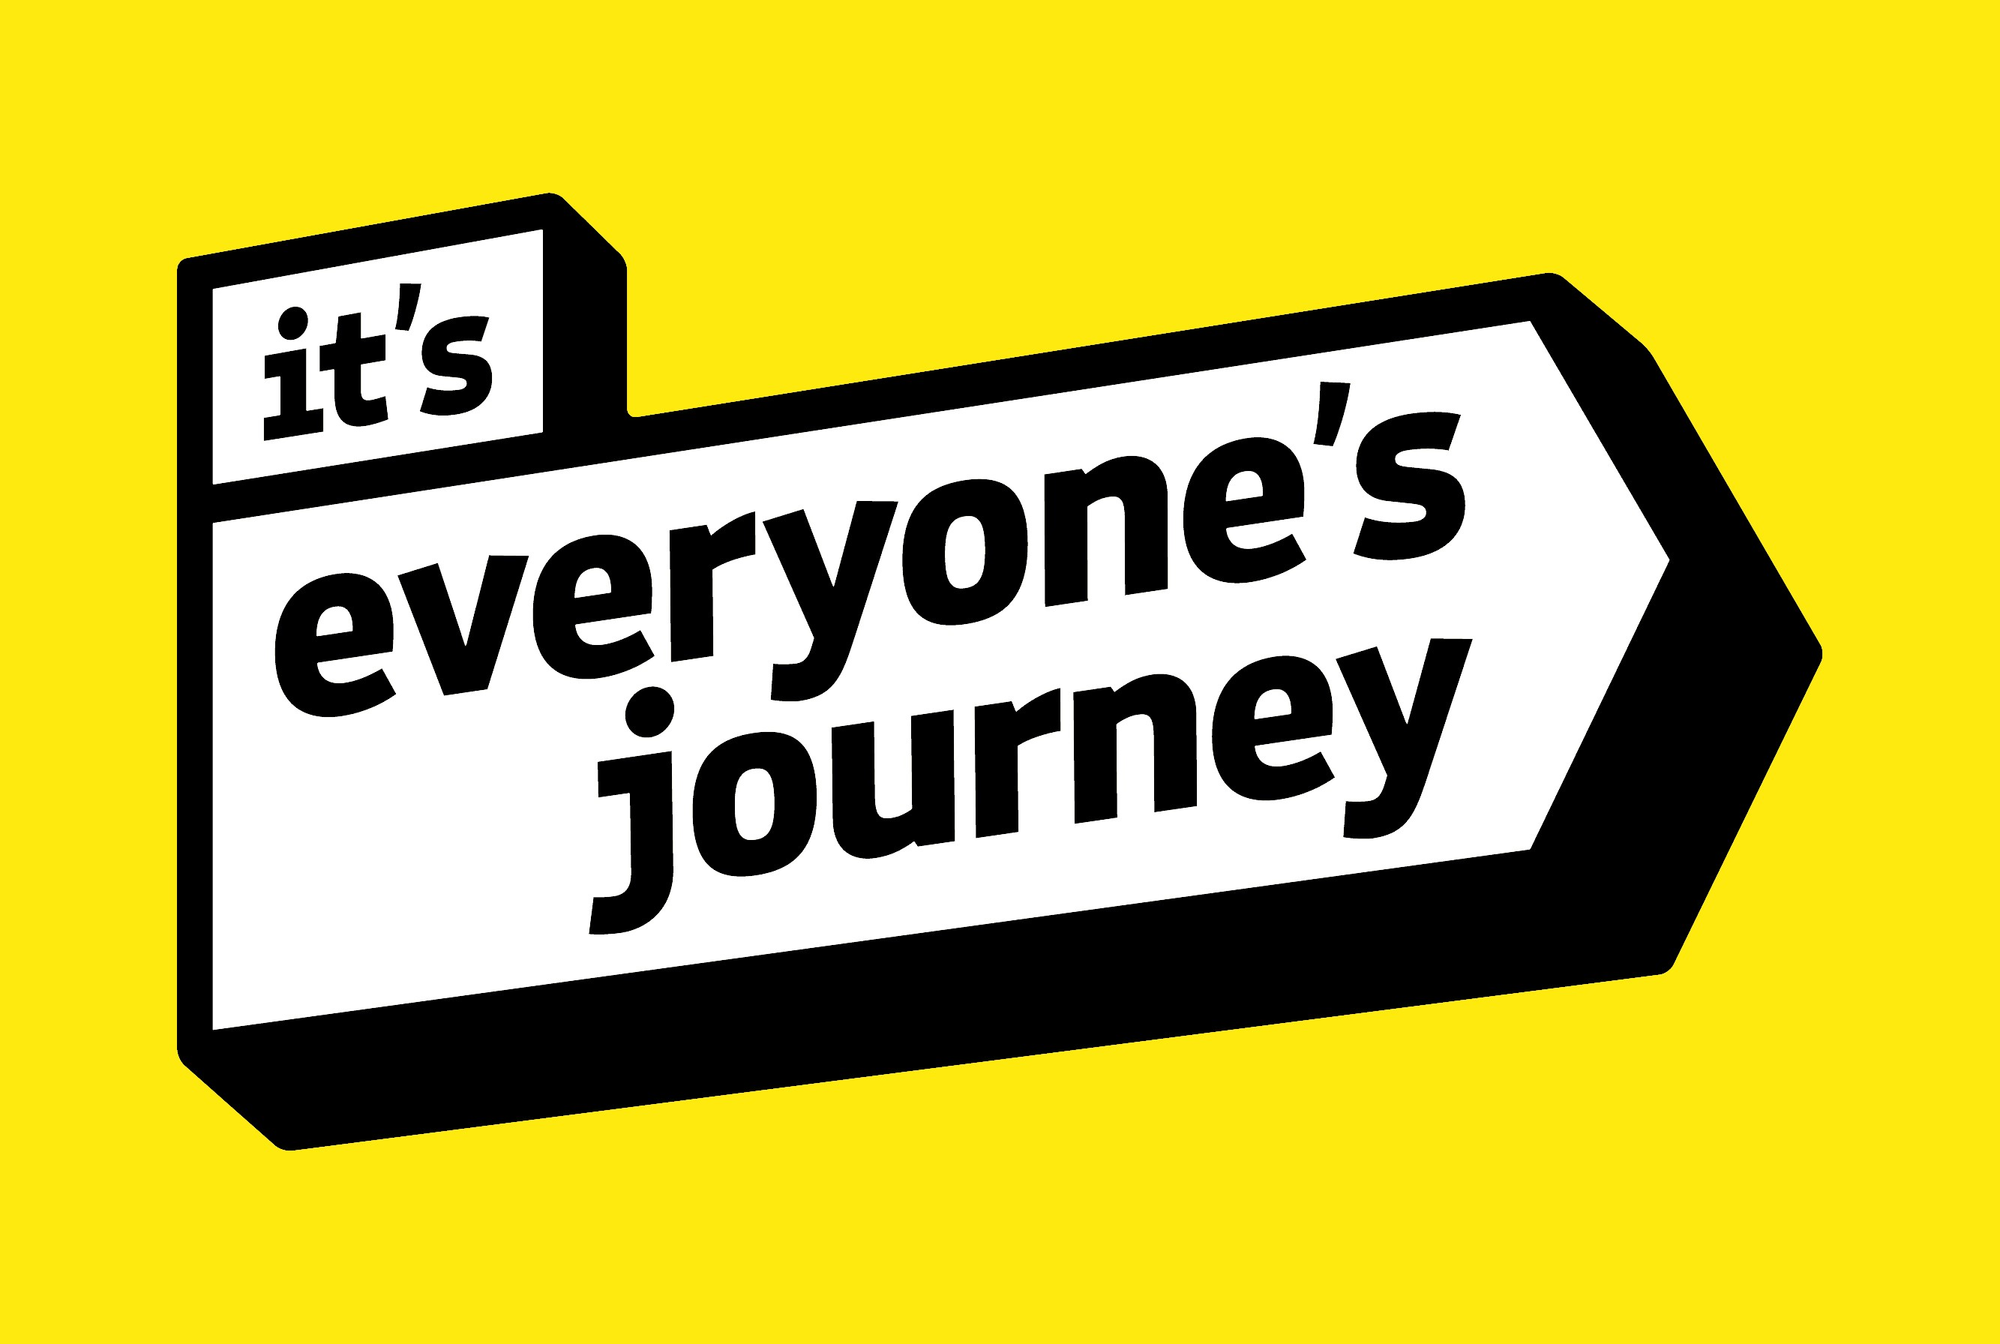 Infographic showing the words "It's everyone's journey" on a bright yellow background.